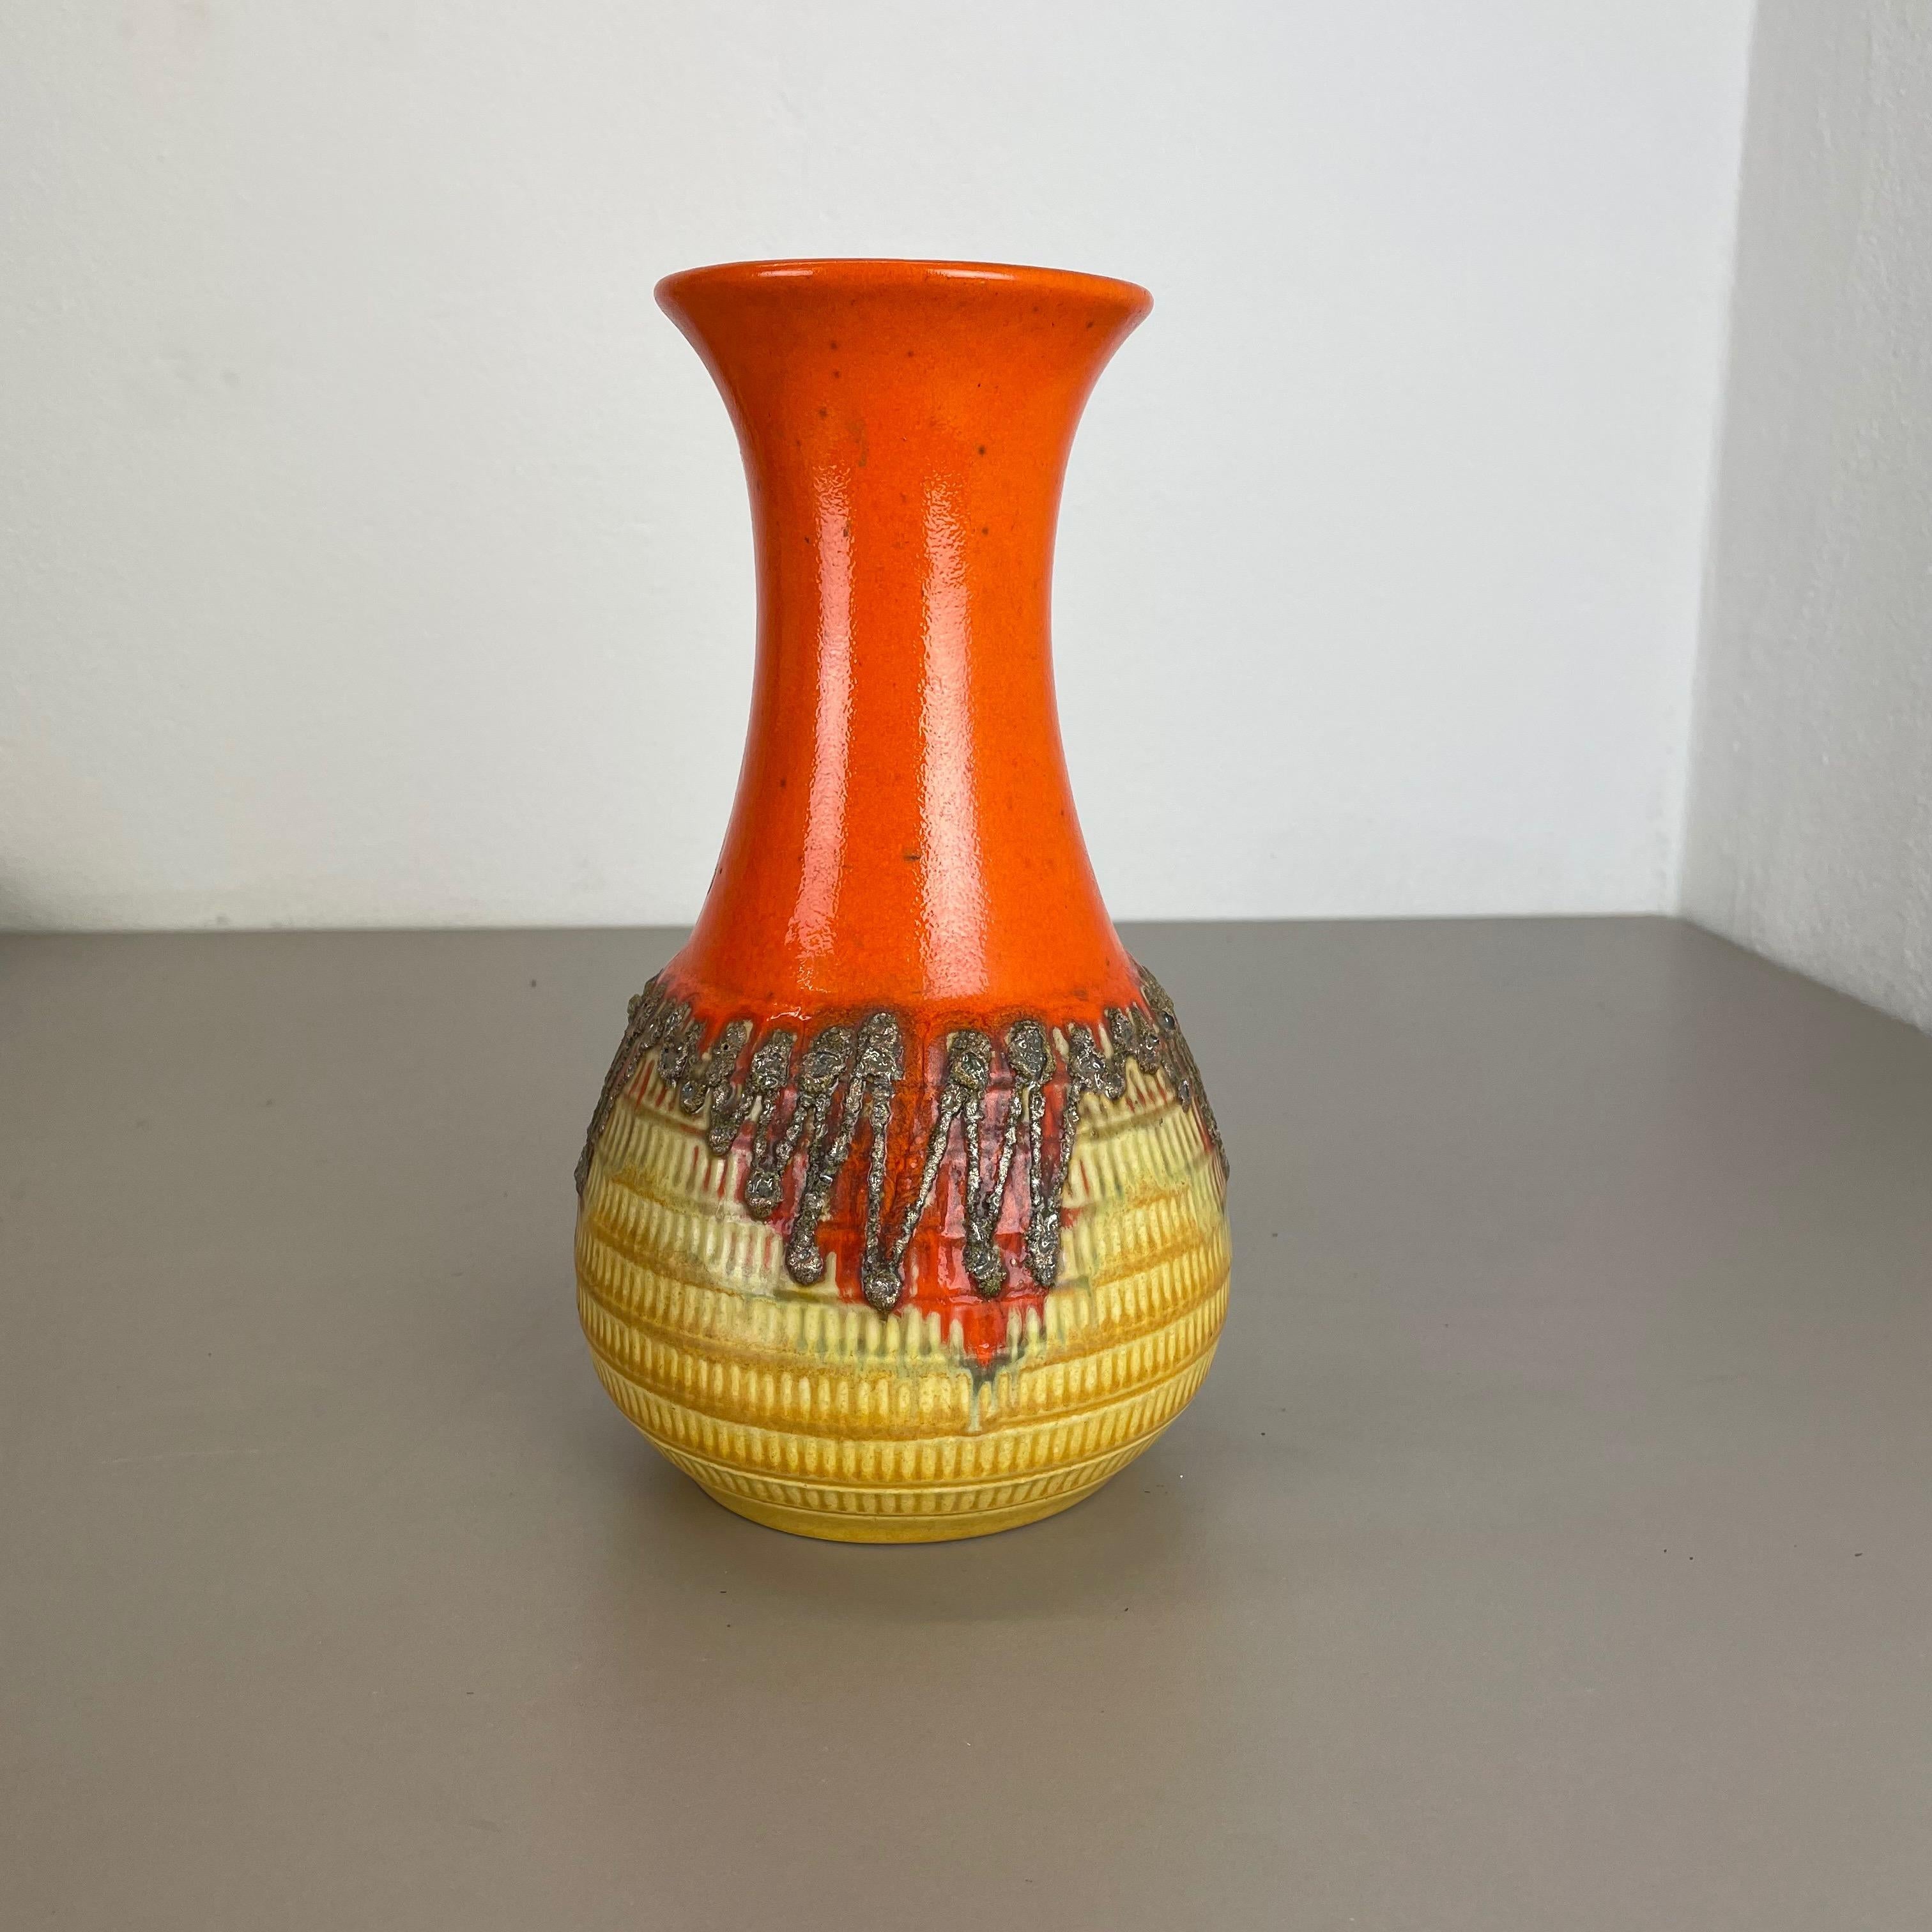 Article:

Pottery ceramic vase


Producer:

JASBA Ceramic, Germany



Decade:

1970s




Original vintage 1970s pottery ceramic vase made in Germany. High quality German production with a nice abstract illustration in orange and